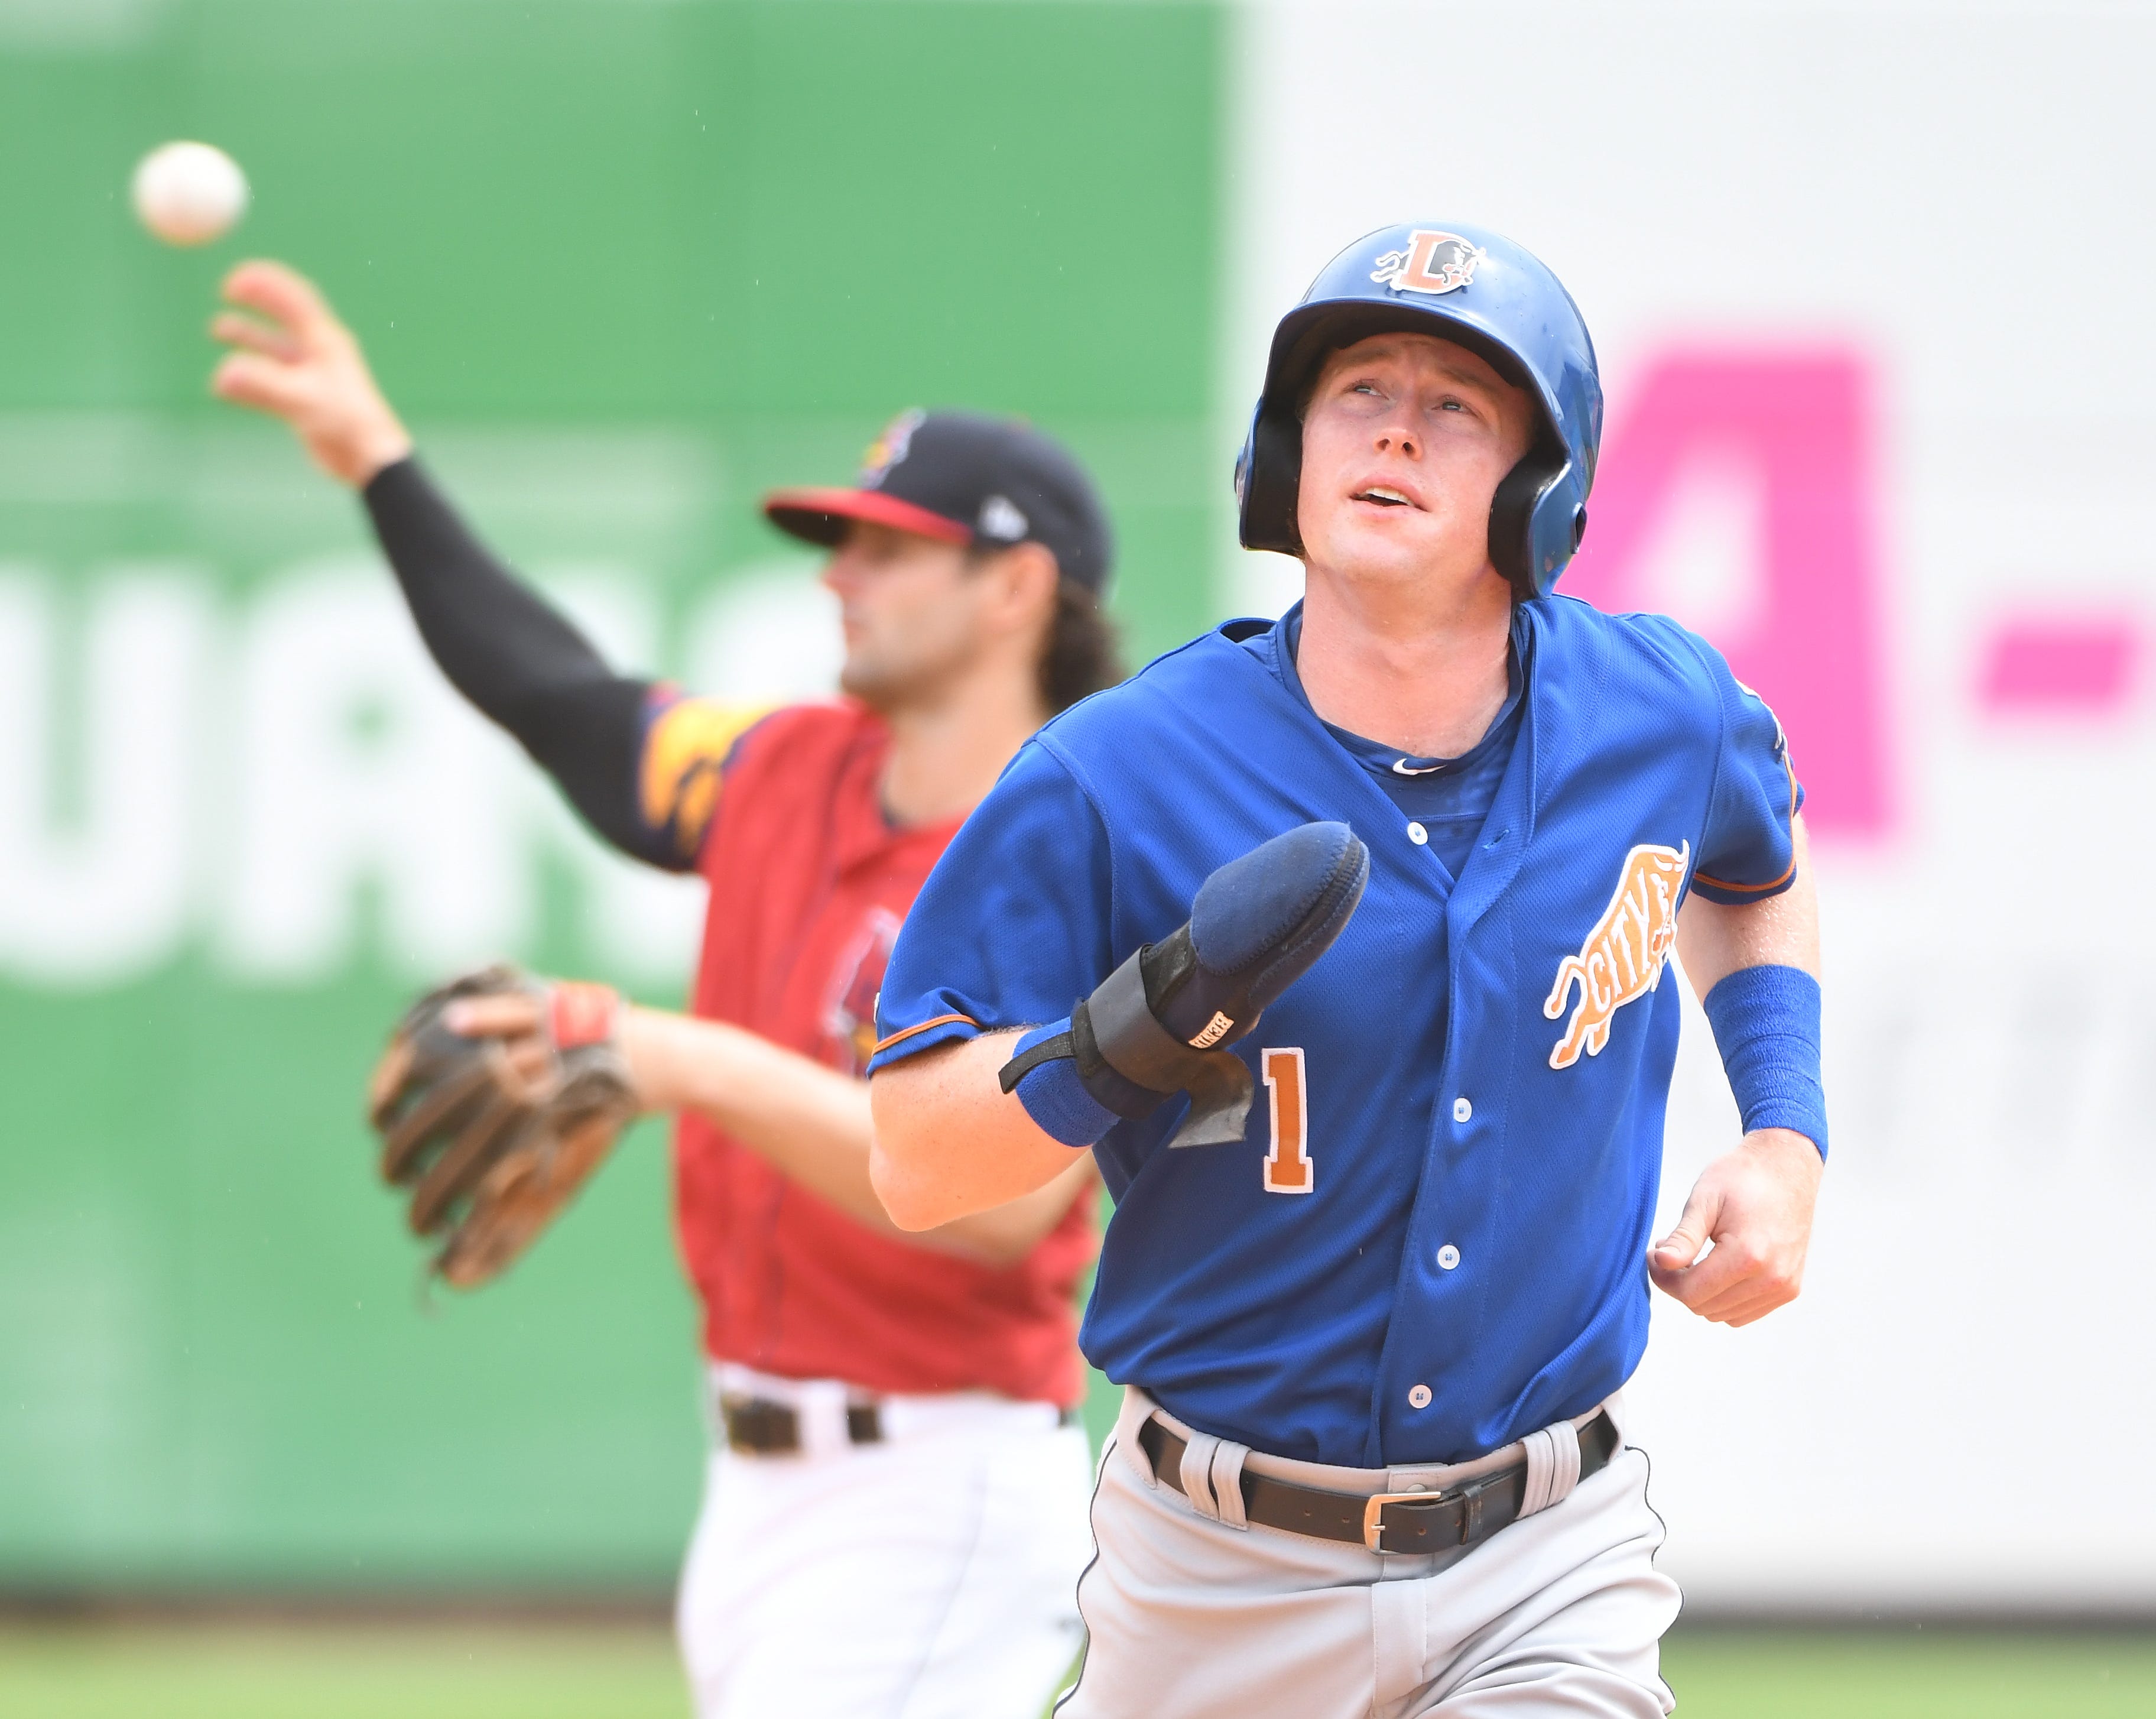 Durham Bulls' Jake Cronenworth, who grew up in St. Clair and played at Michigan, is one of the few two-way players in the game.